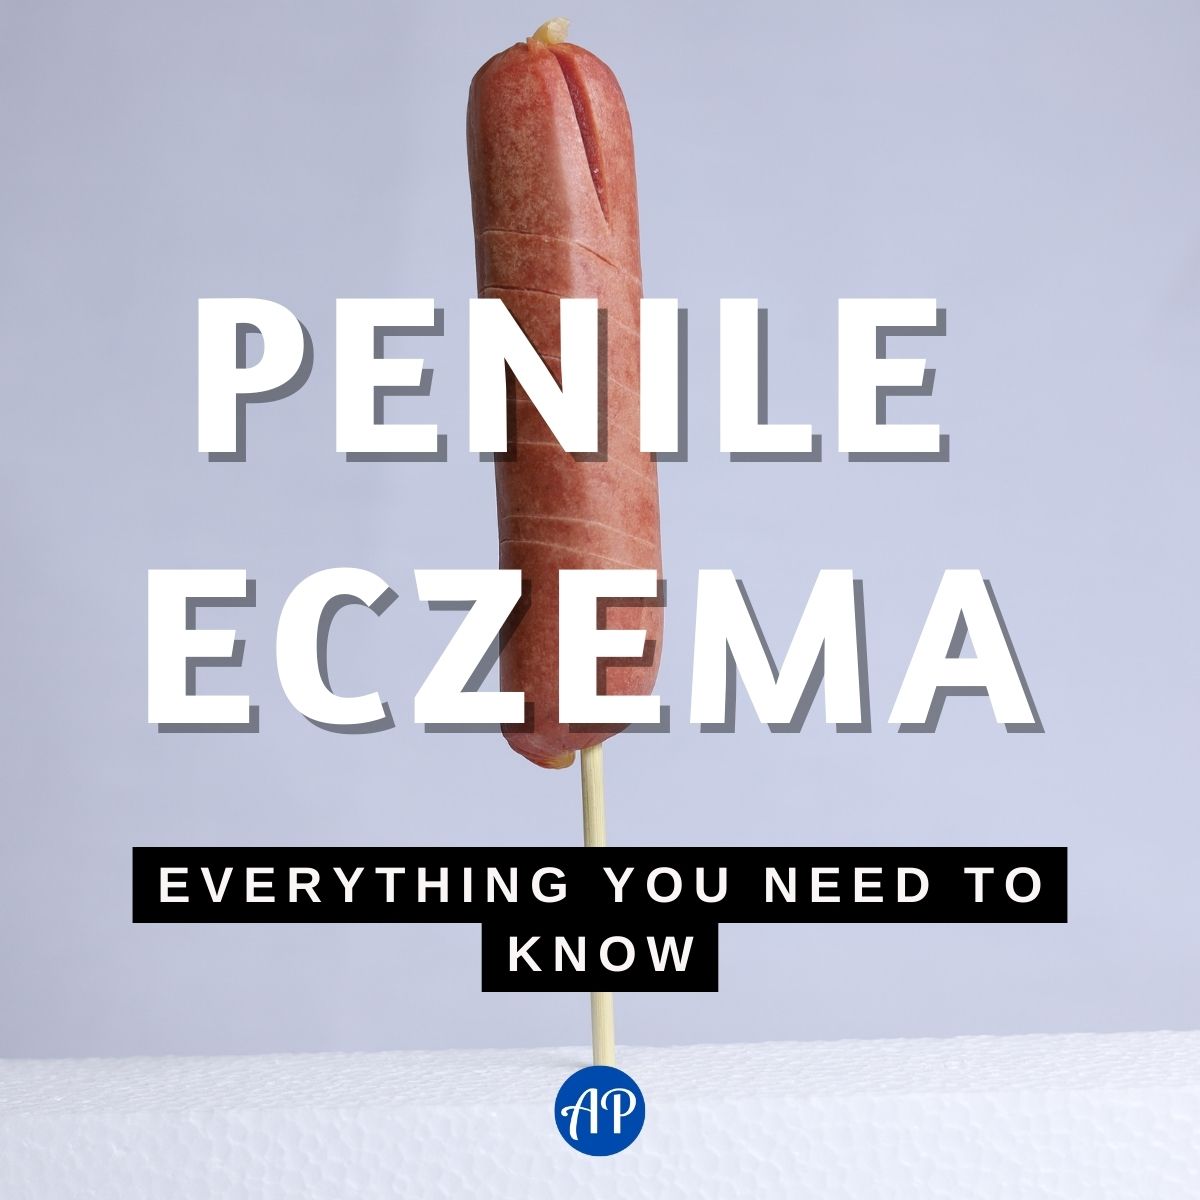 Penile Eczema: Everything You Need To Know